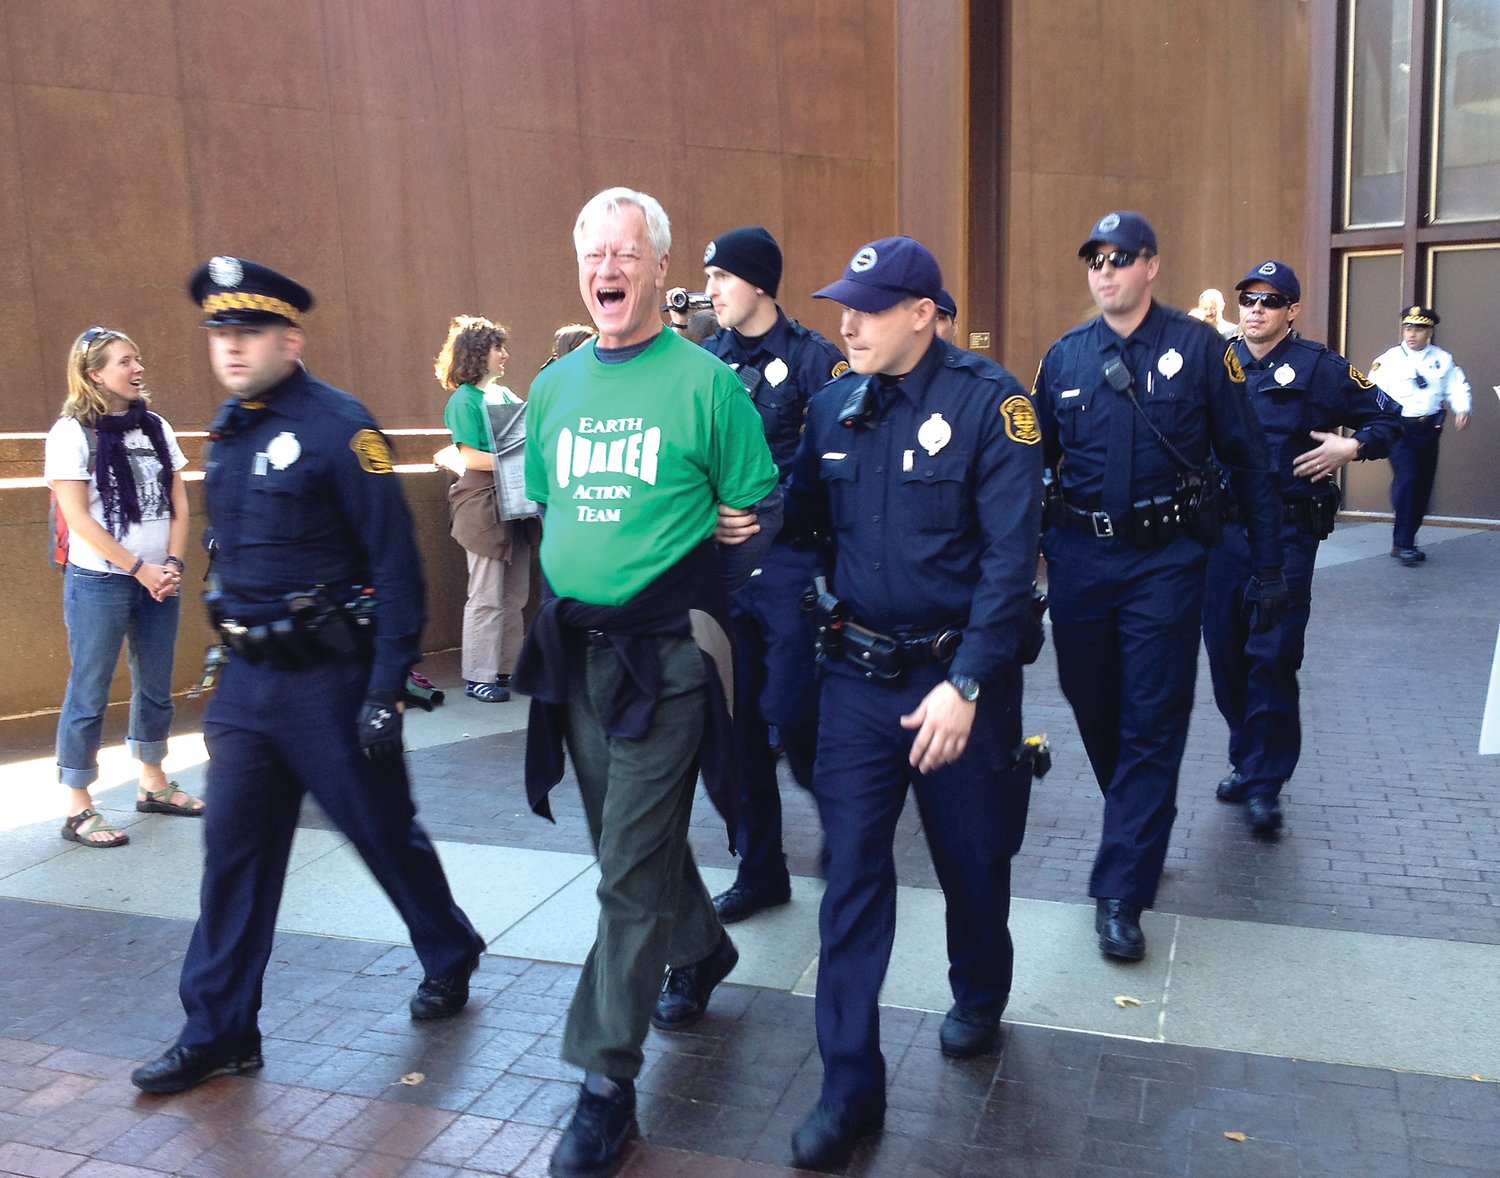 George Lakey, founder with his daughter Ingrid Lakey of Philadelphia’s Earth Quaker Action Team, is arrested at demonstration.